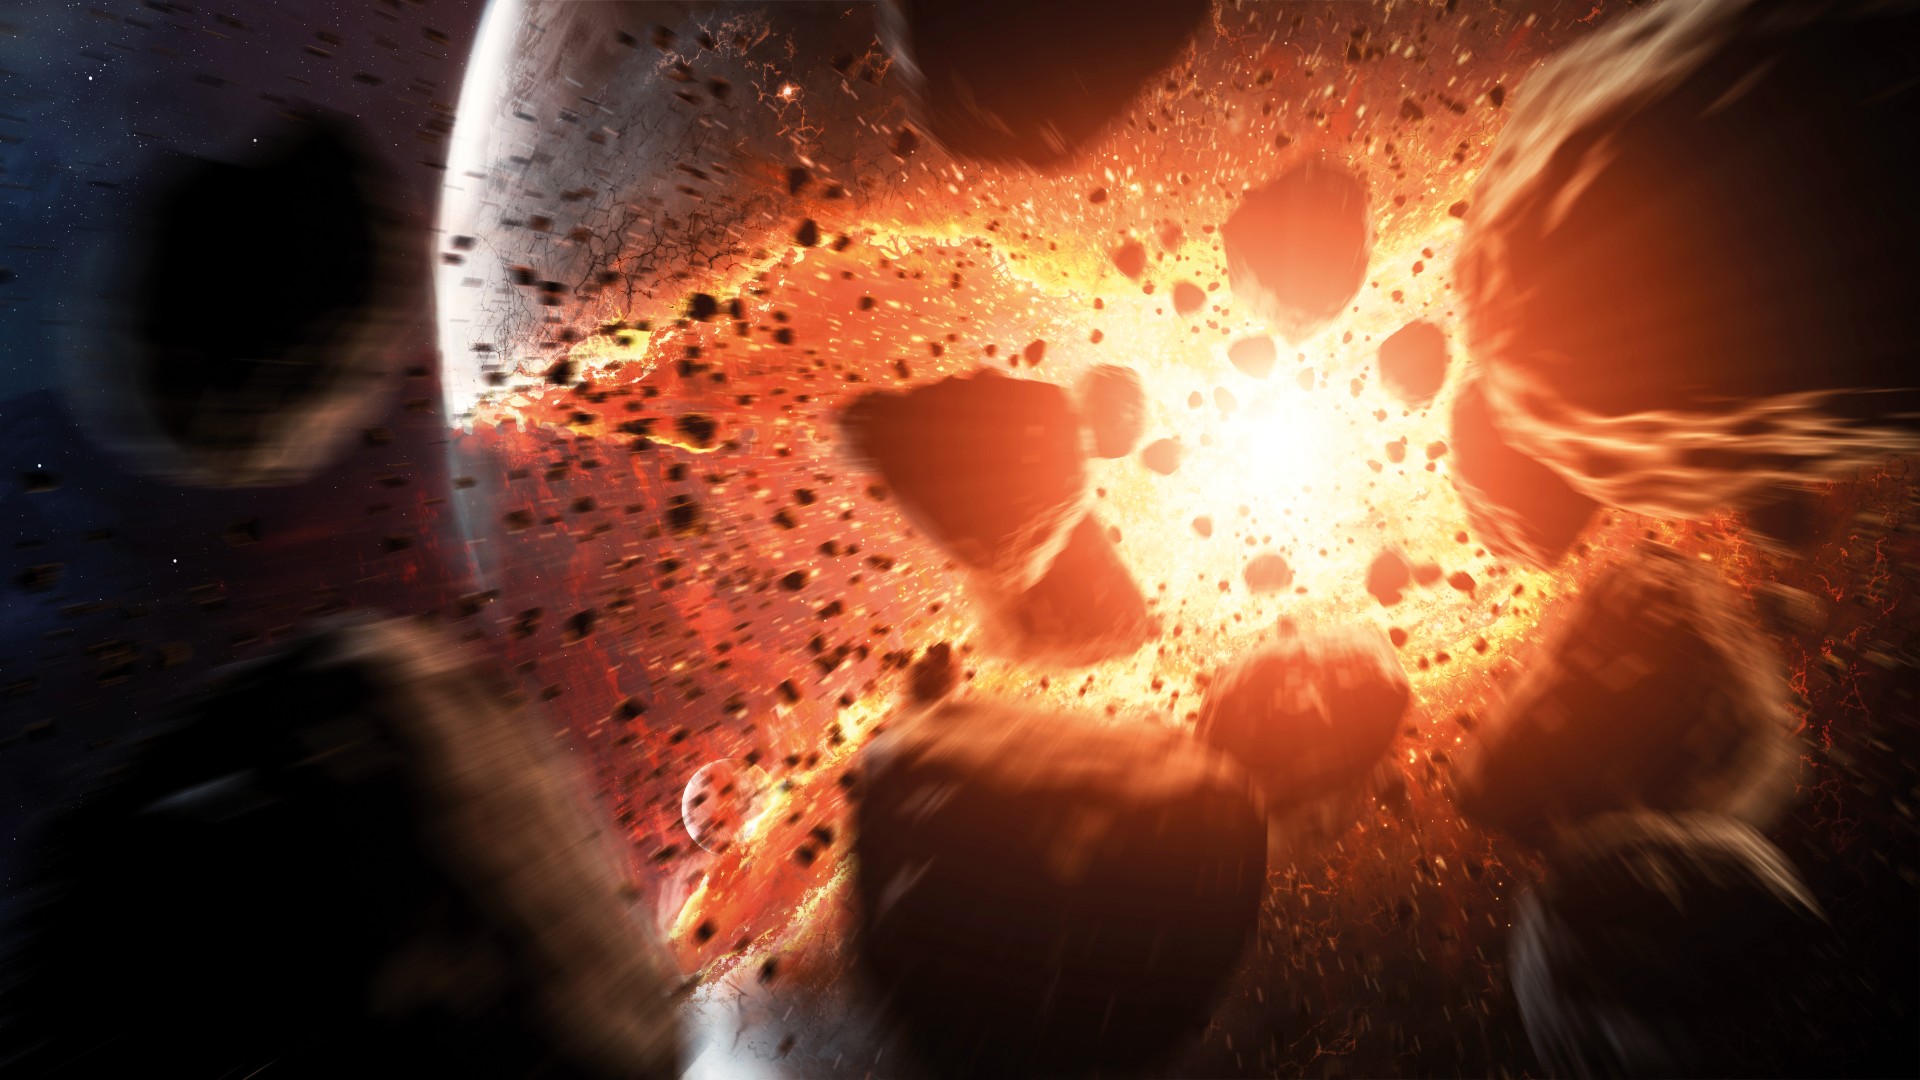 Could an asteroid destroy Earth?